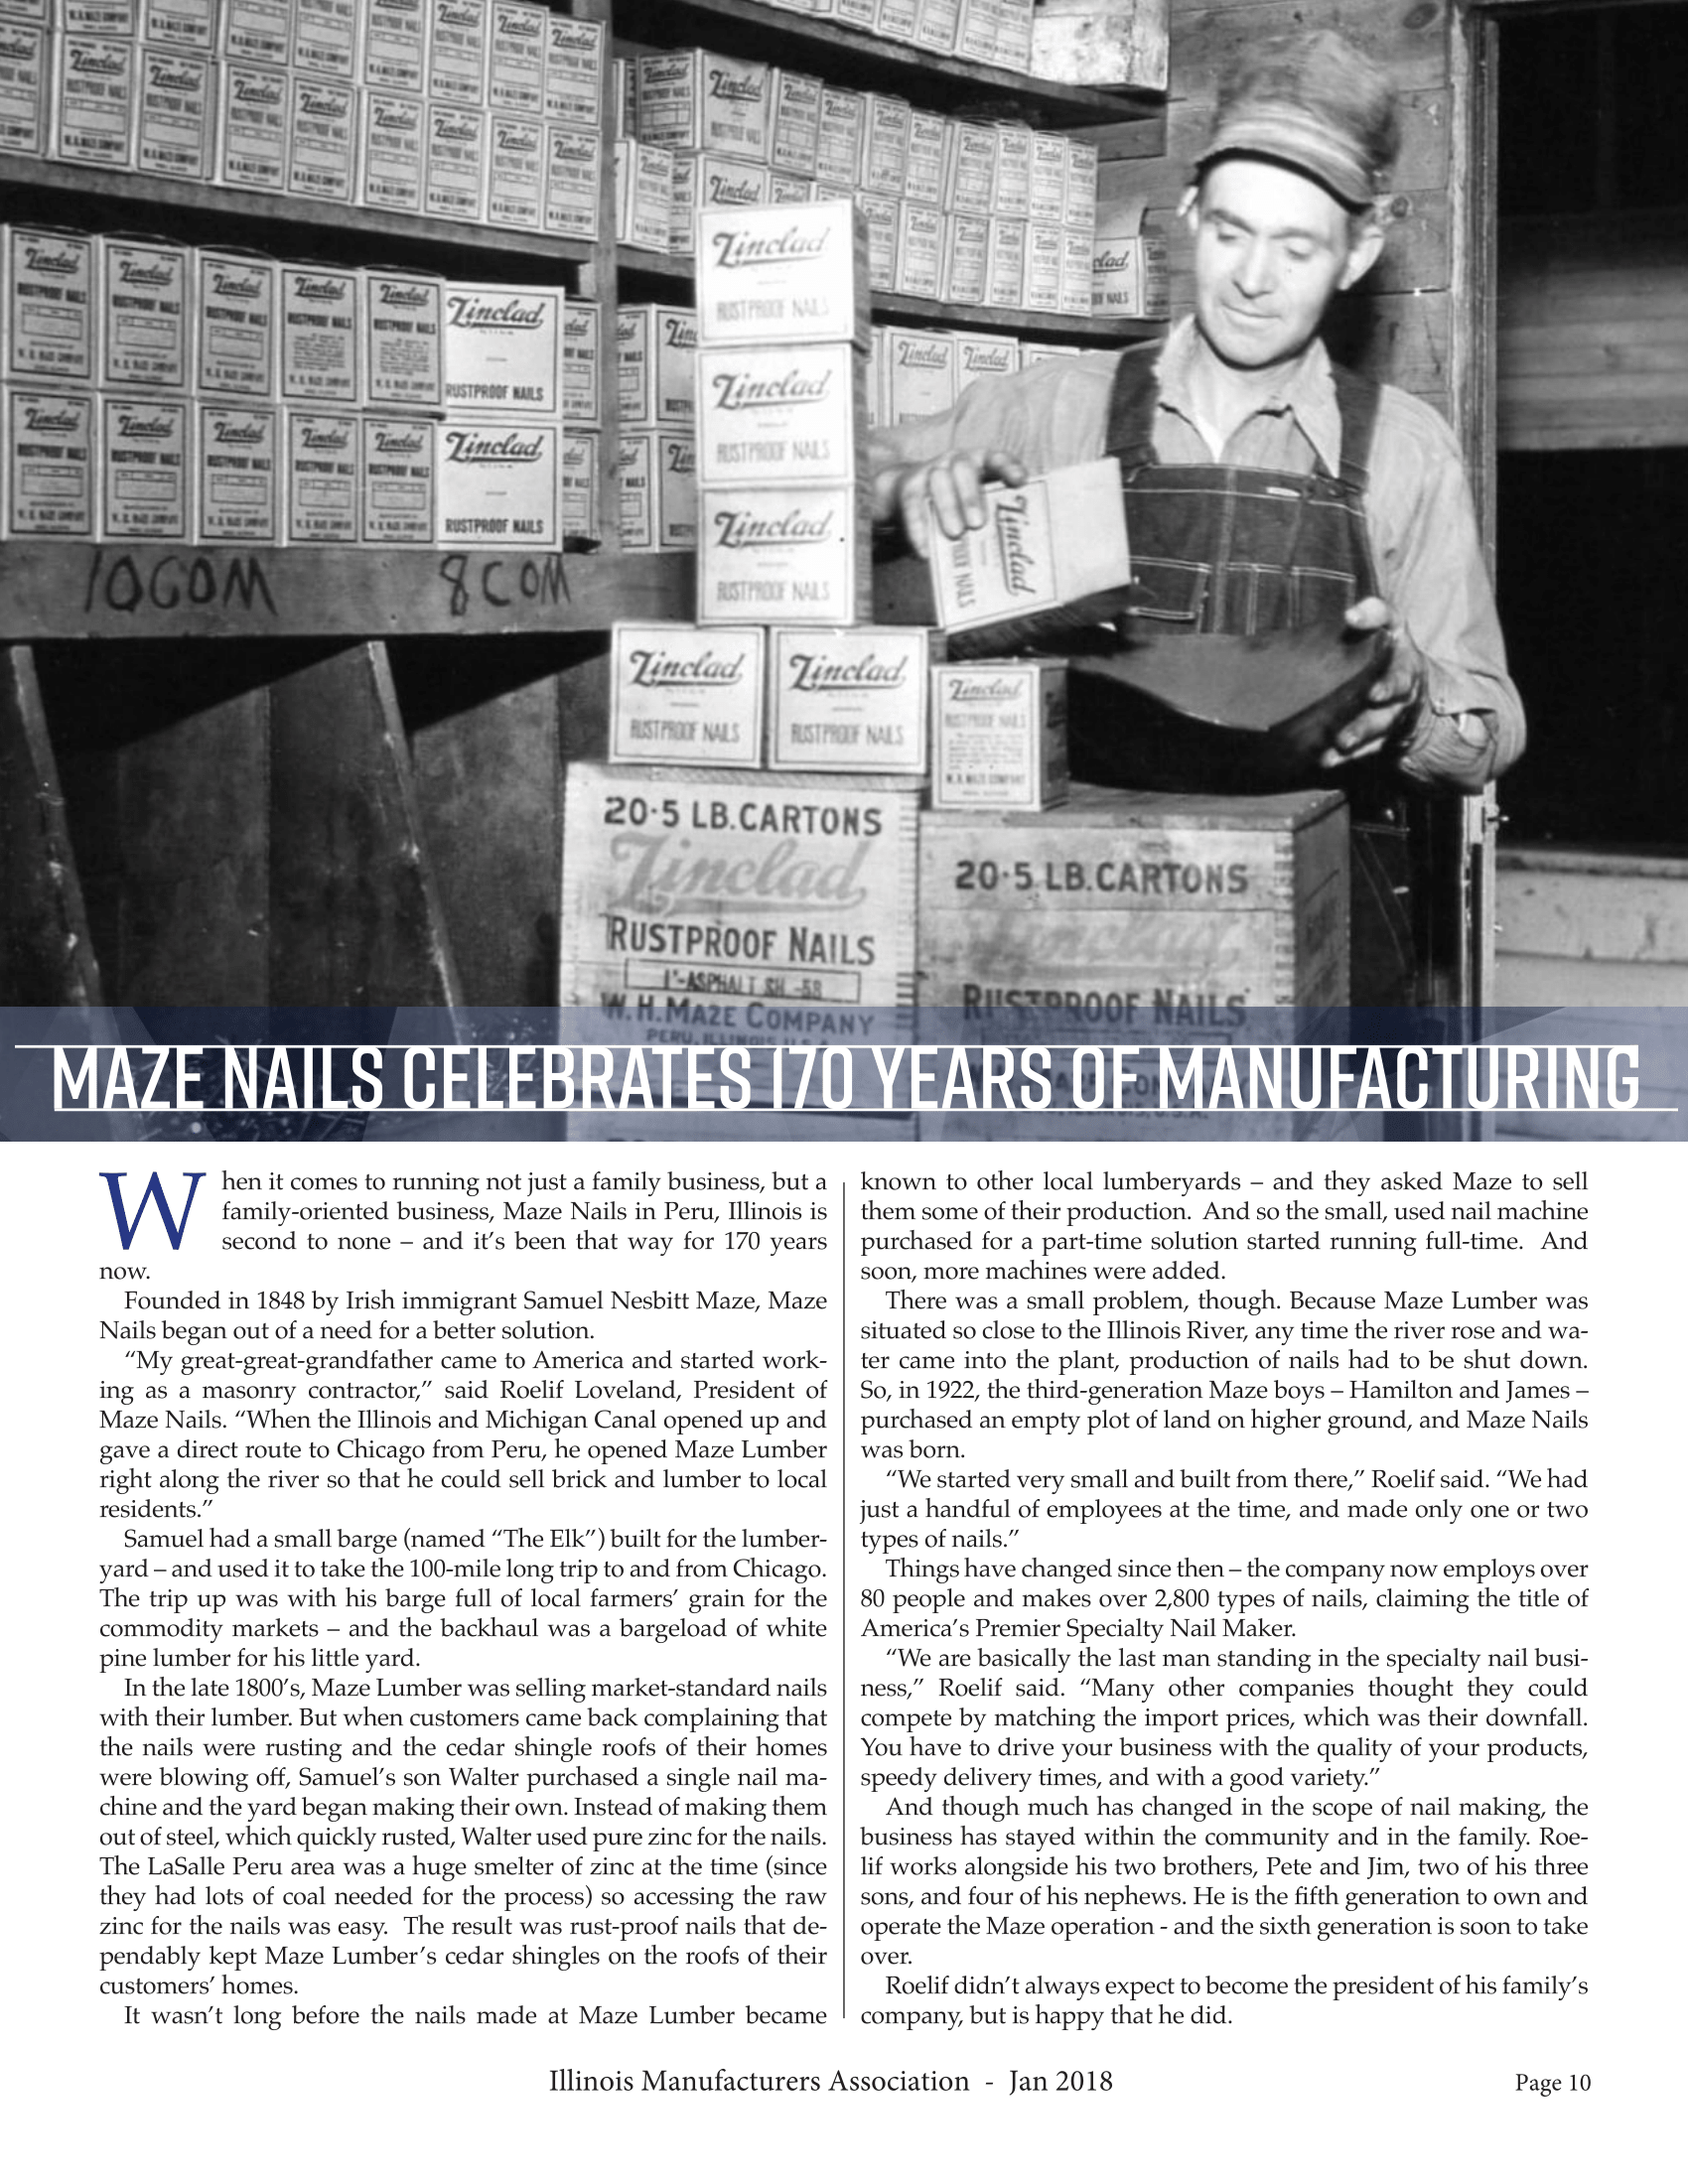 Maze Nails Celebrates 170 Years of Manufacturing